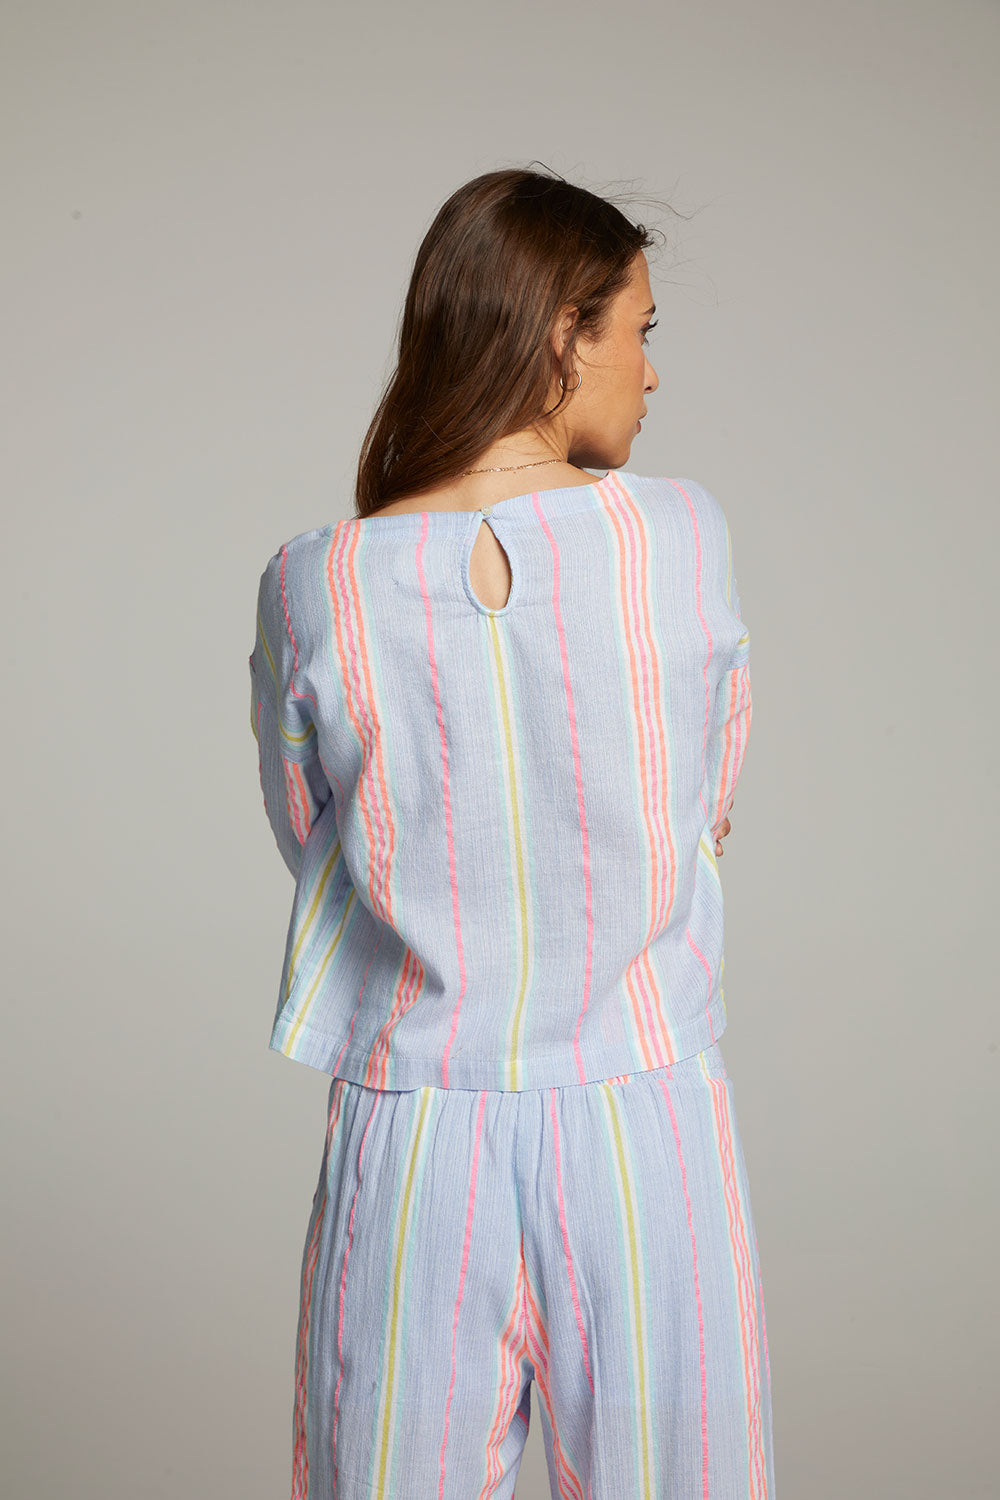 Martine South West Beach Stripe Blouse WOMENS chaserbrand